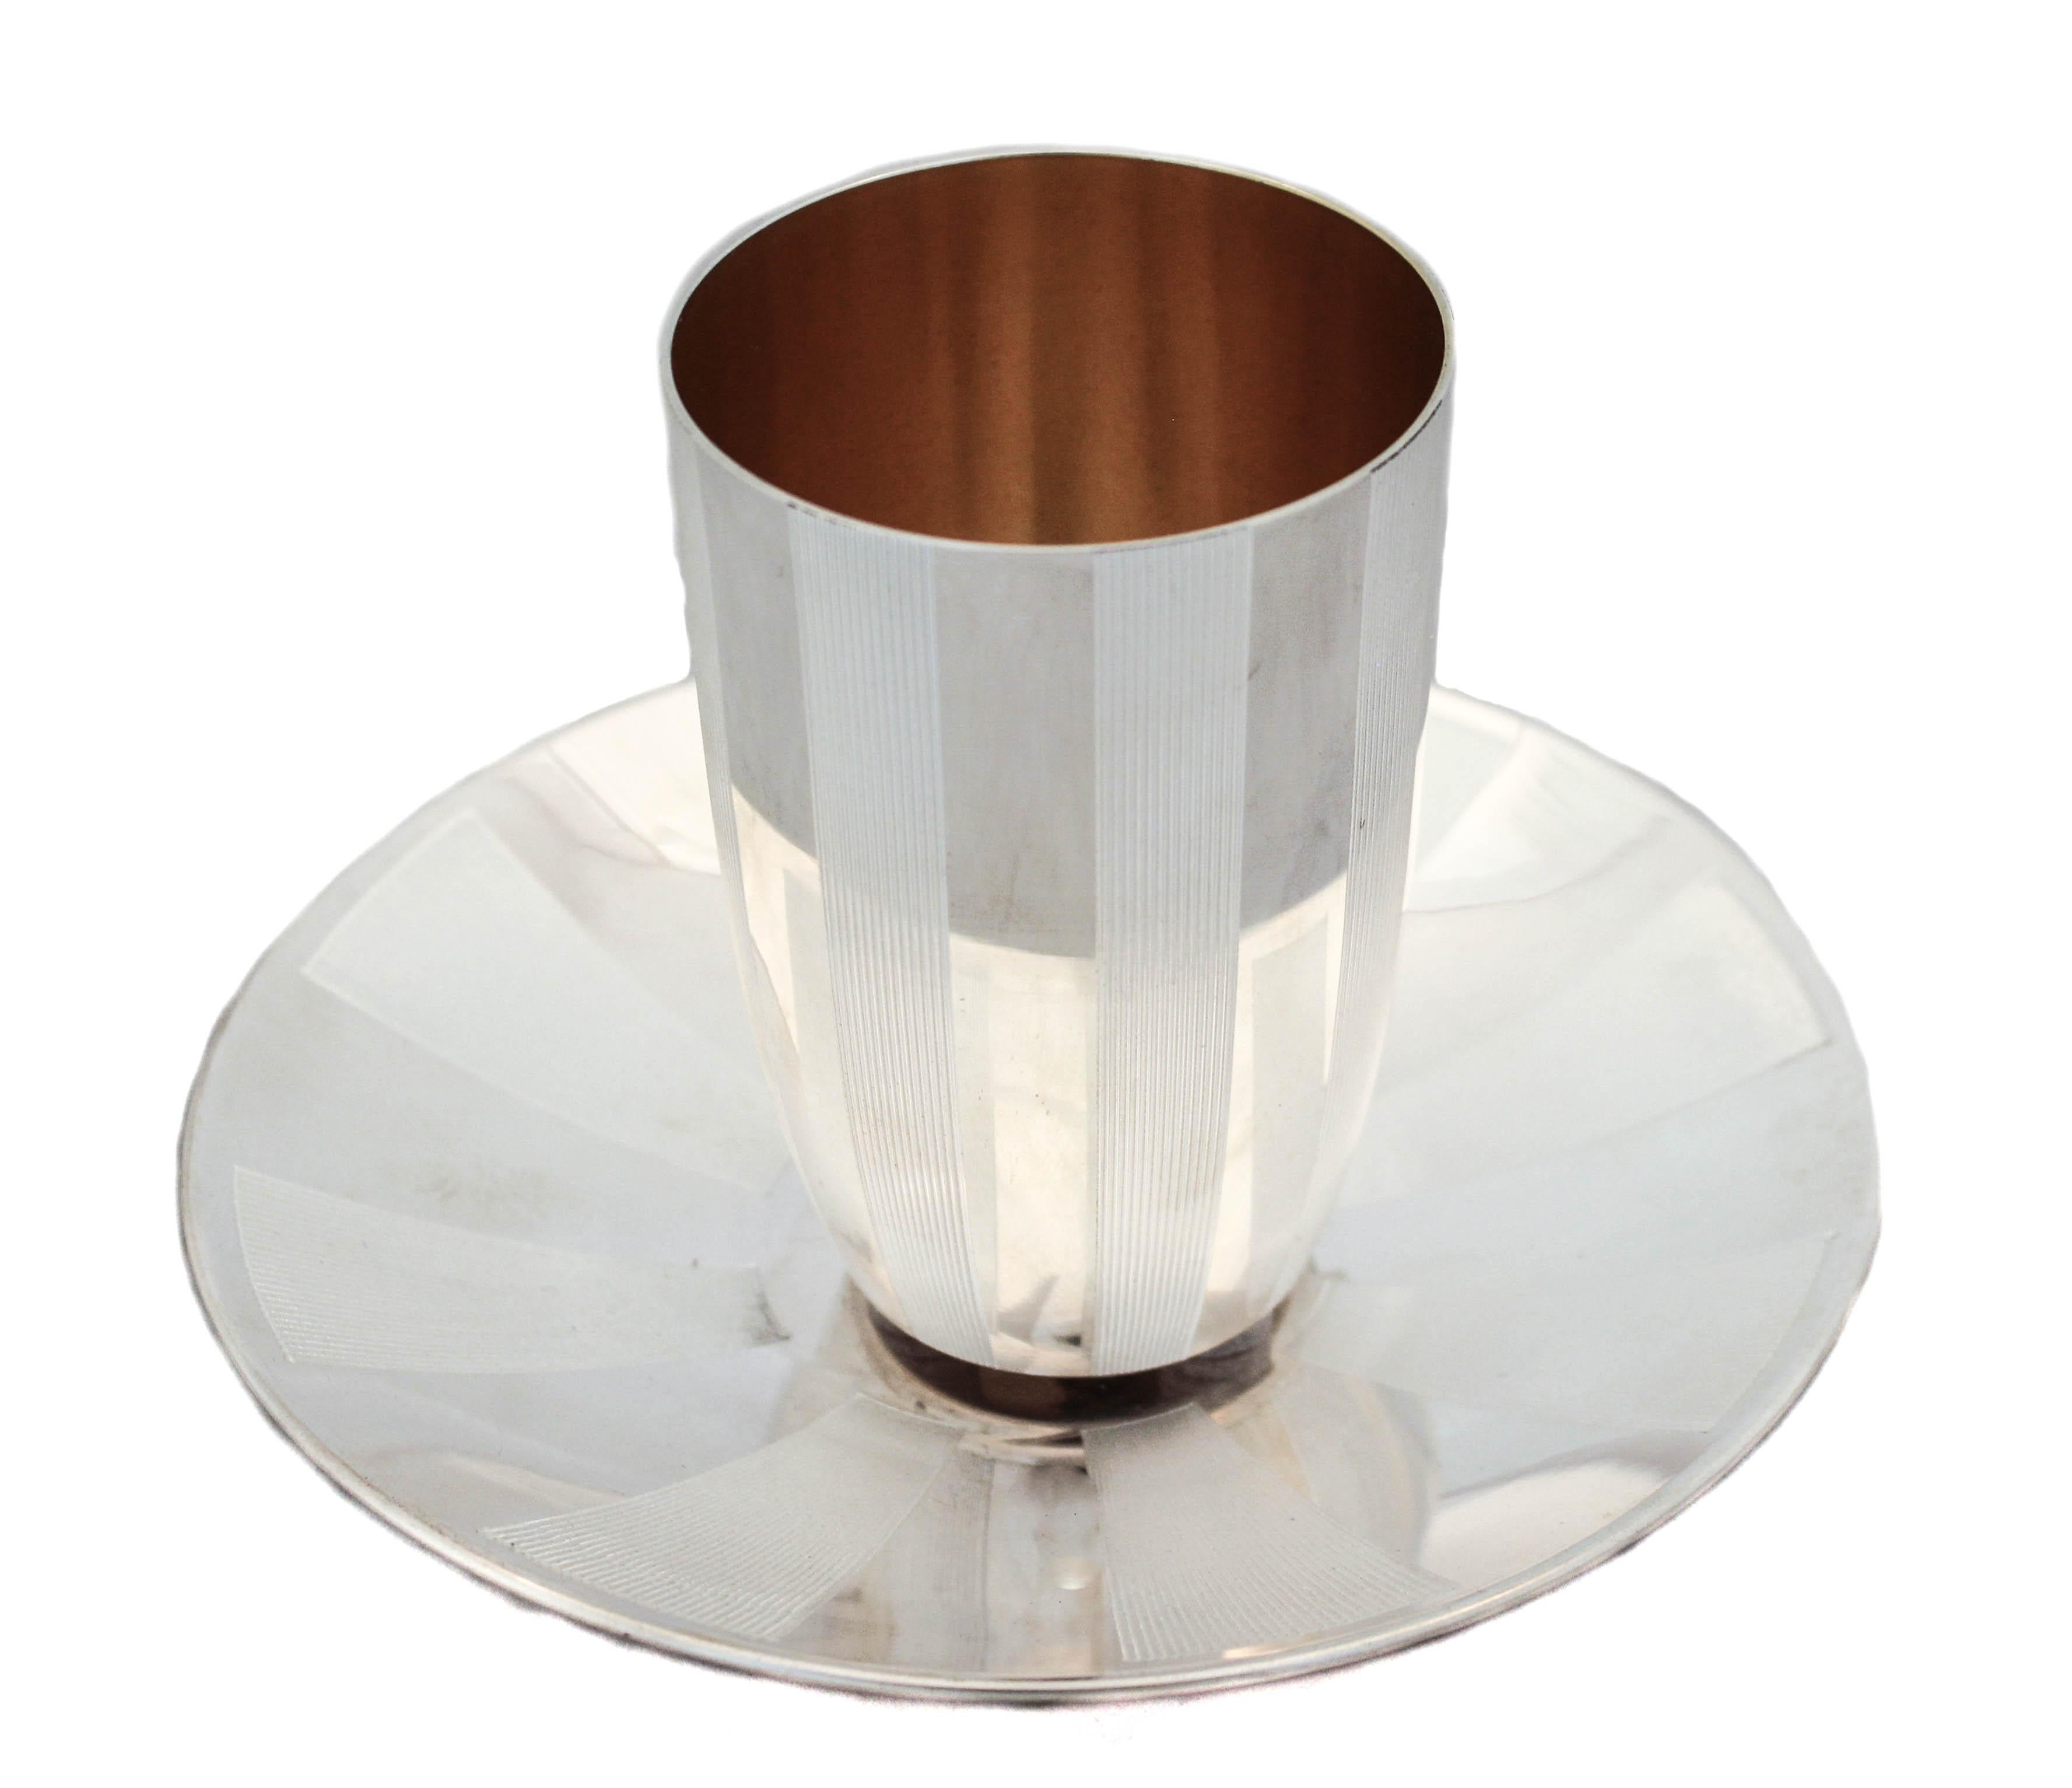 We are delighted to offer you this sterling silver (Kiddush) goblet and matching plate.  Made in Israel it is modern and sharp.  It has a striped design; alternating between the two.  The stripes have finely engraved ridges that give it texture. 